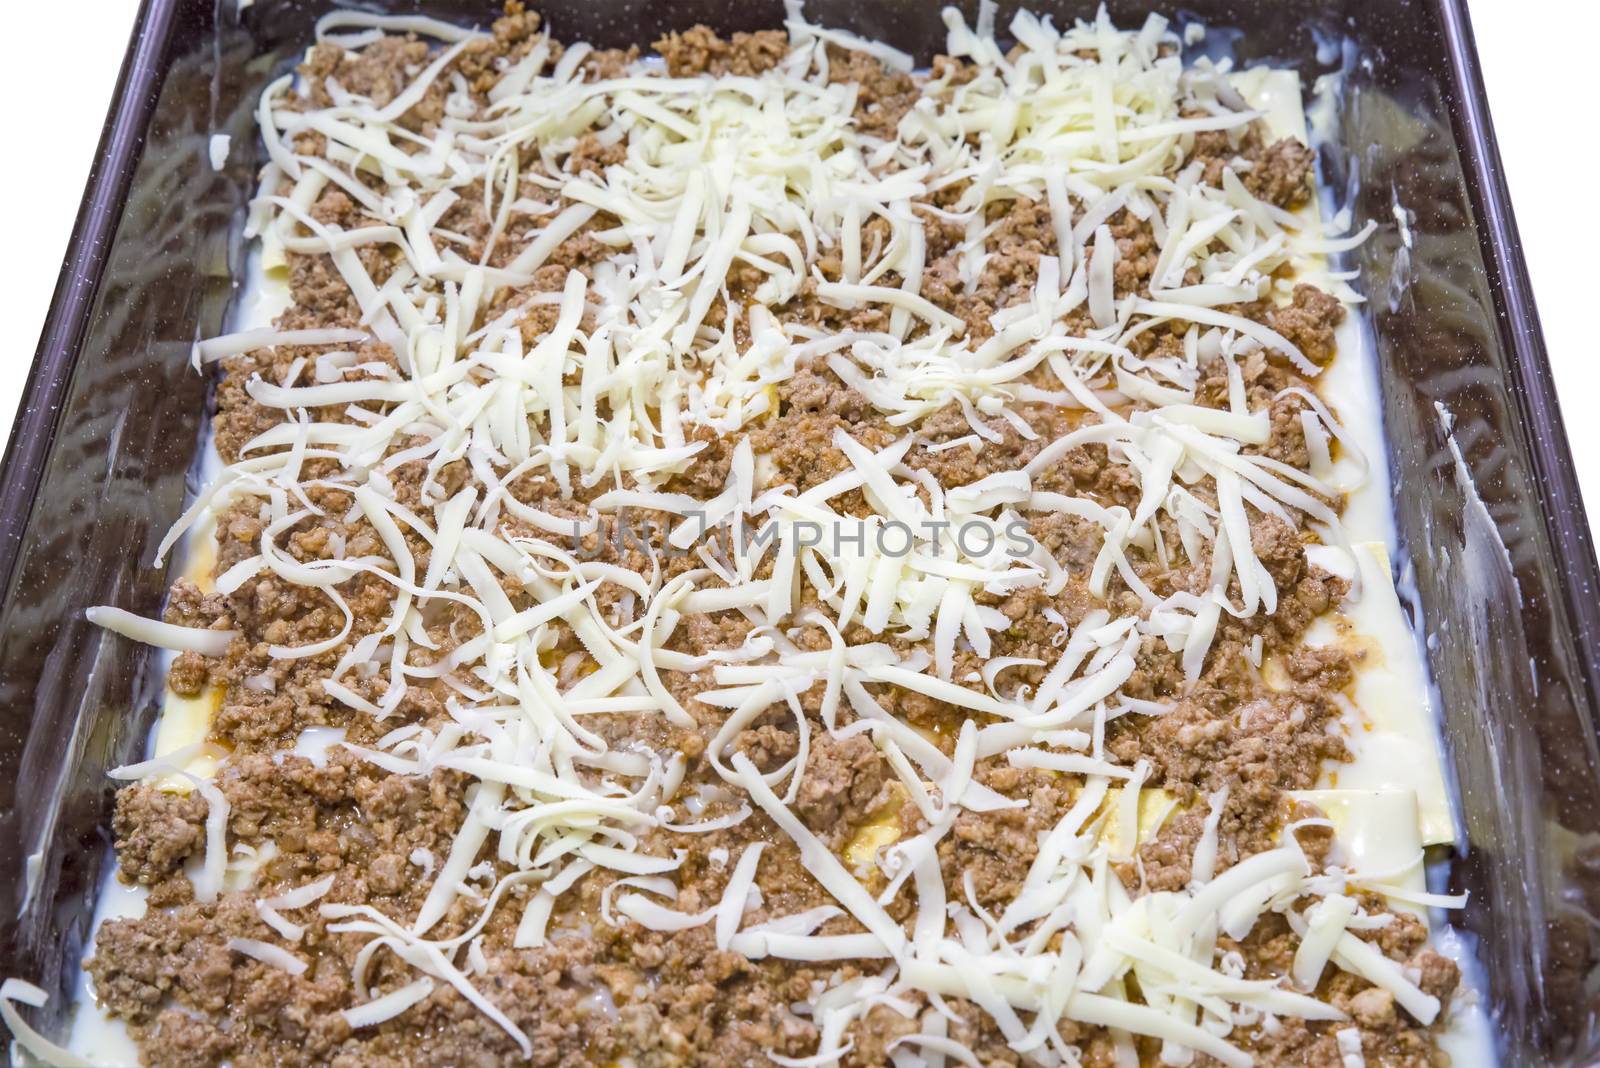 Tray with homemade lasagna ready to be cooked